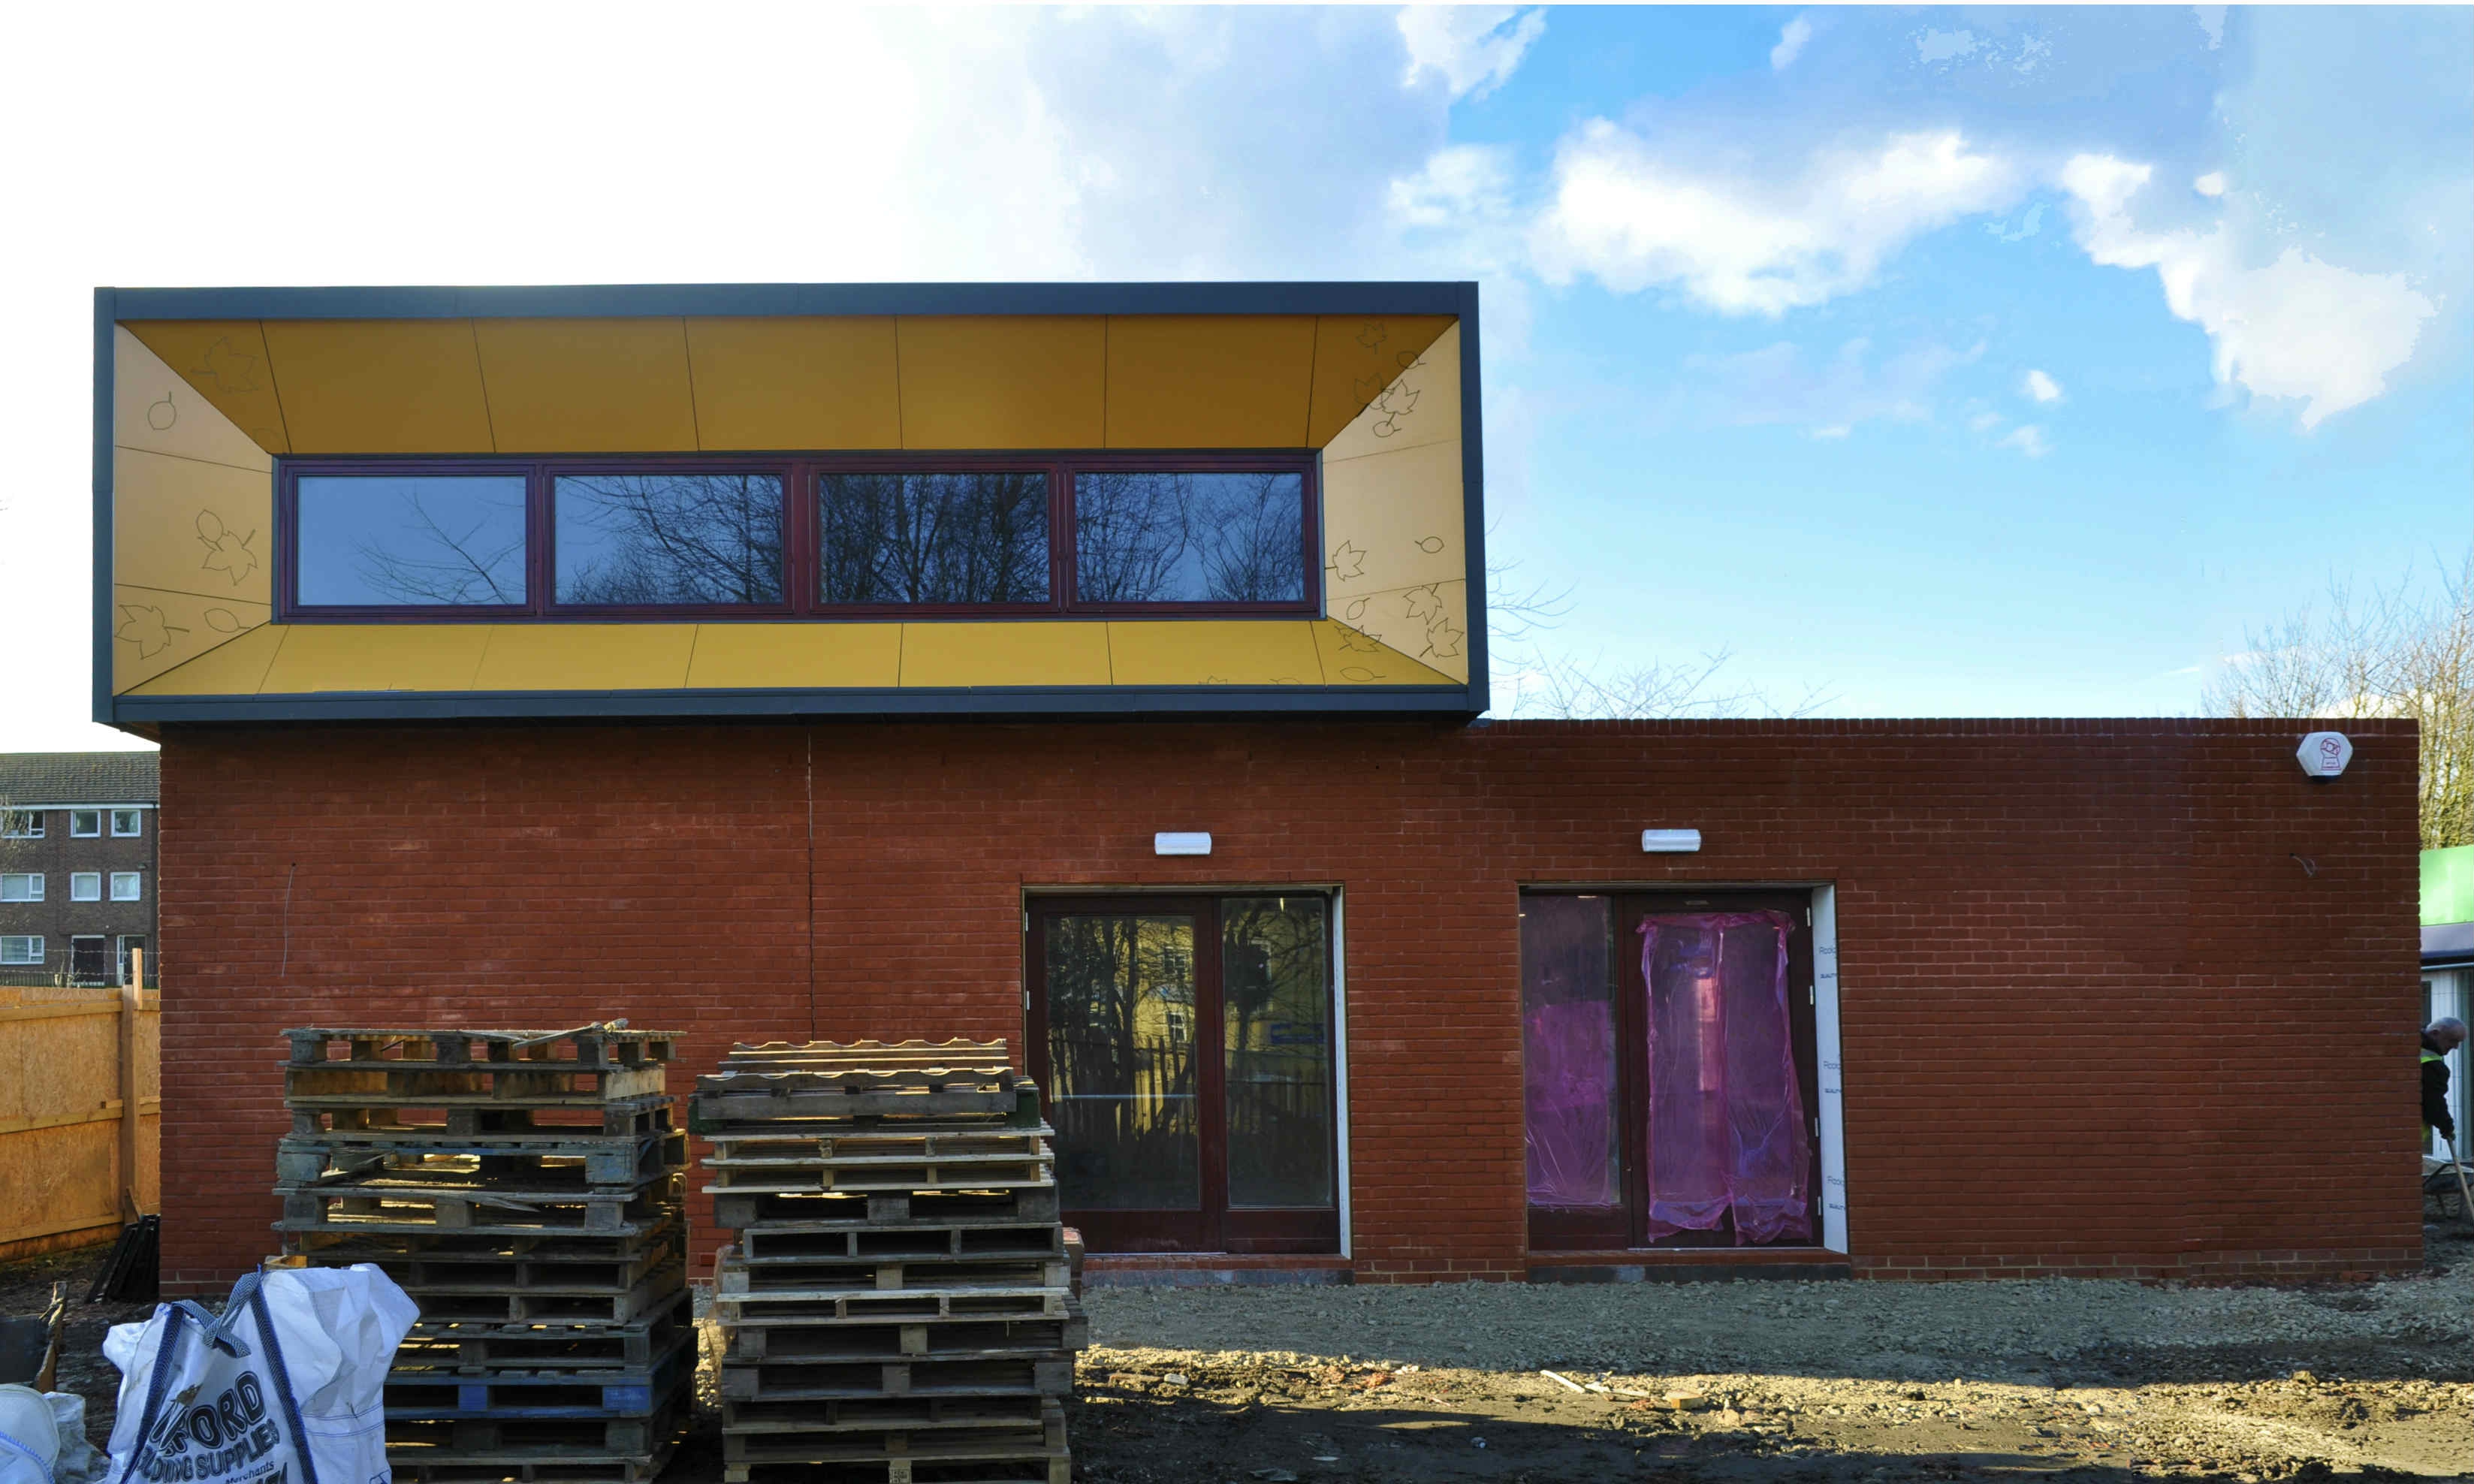 Student-designed New Wortley Community Centre set for completion